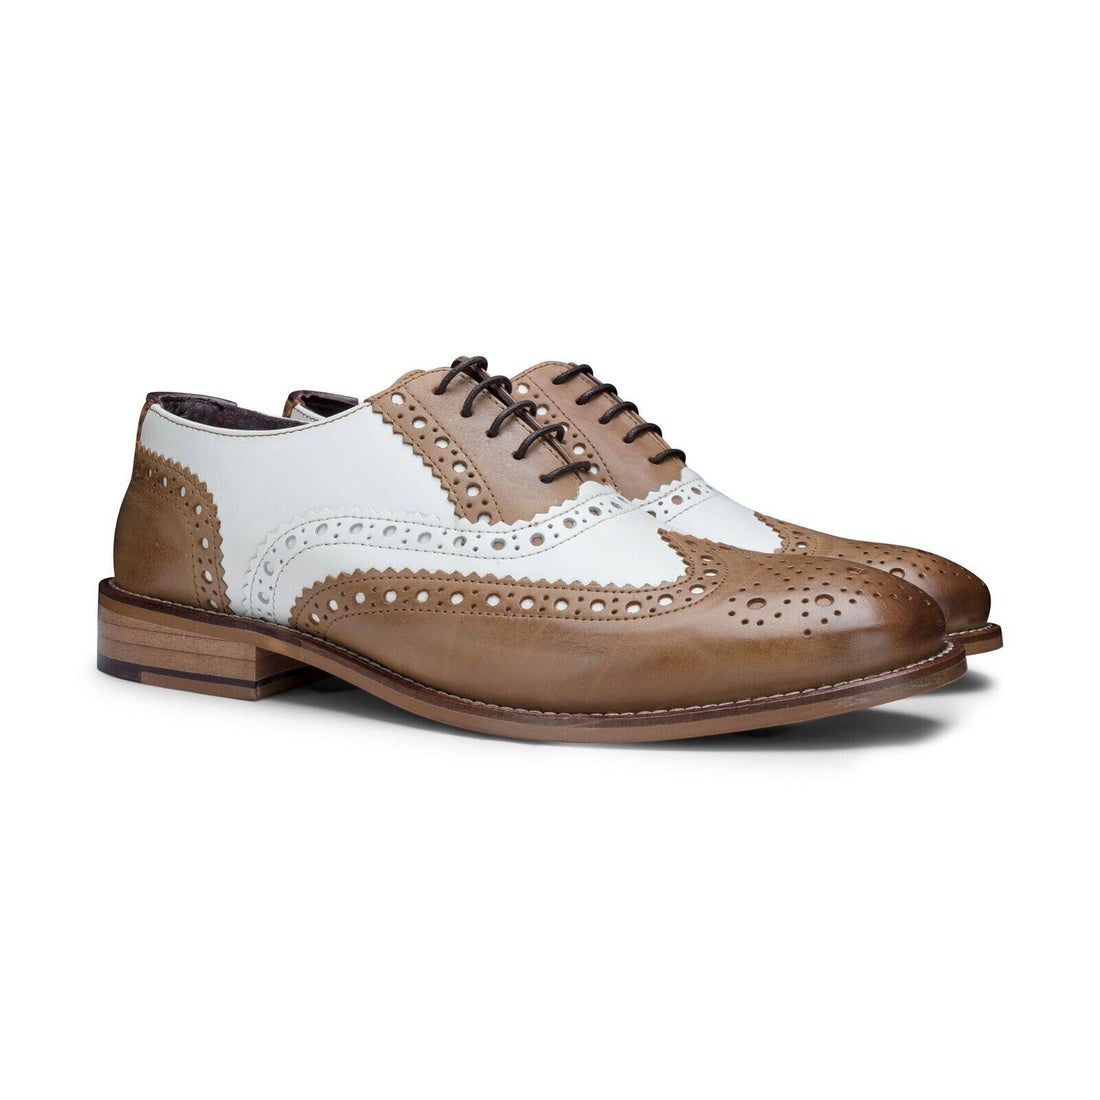 Mens Classic Oxford Tan/White Leather Gatsby Brogue Shoes - Upperclass Fashions 